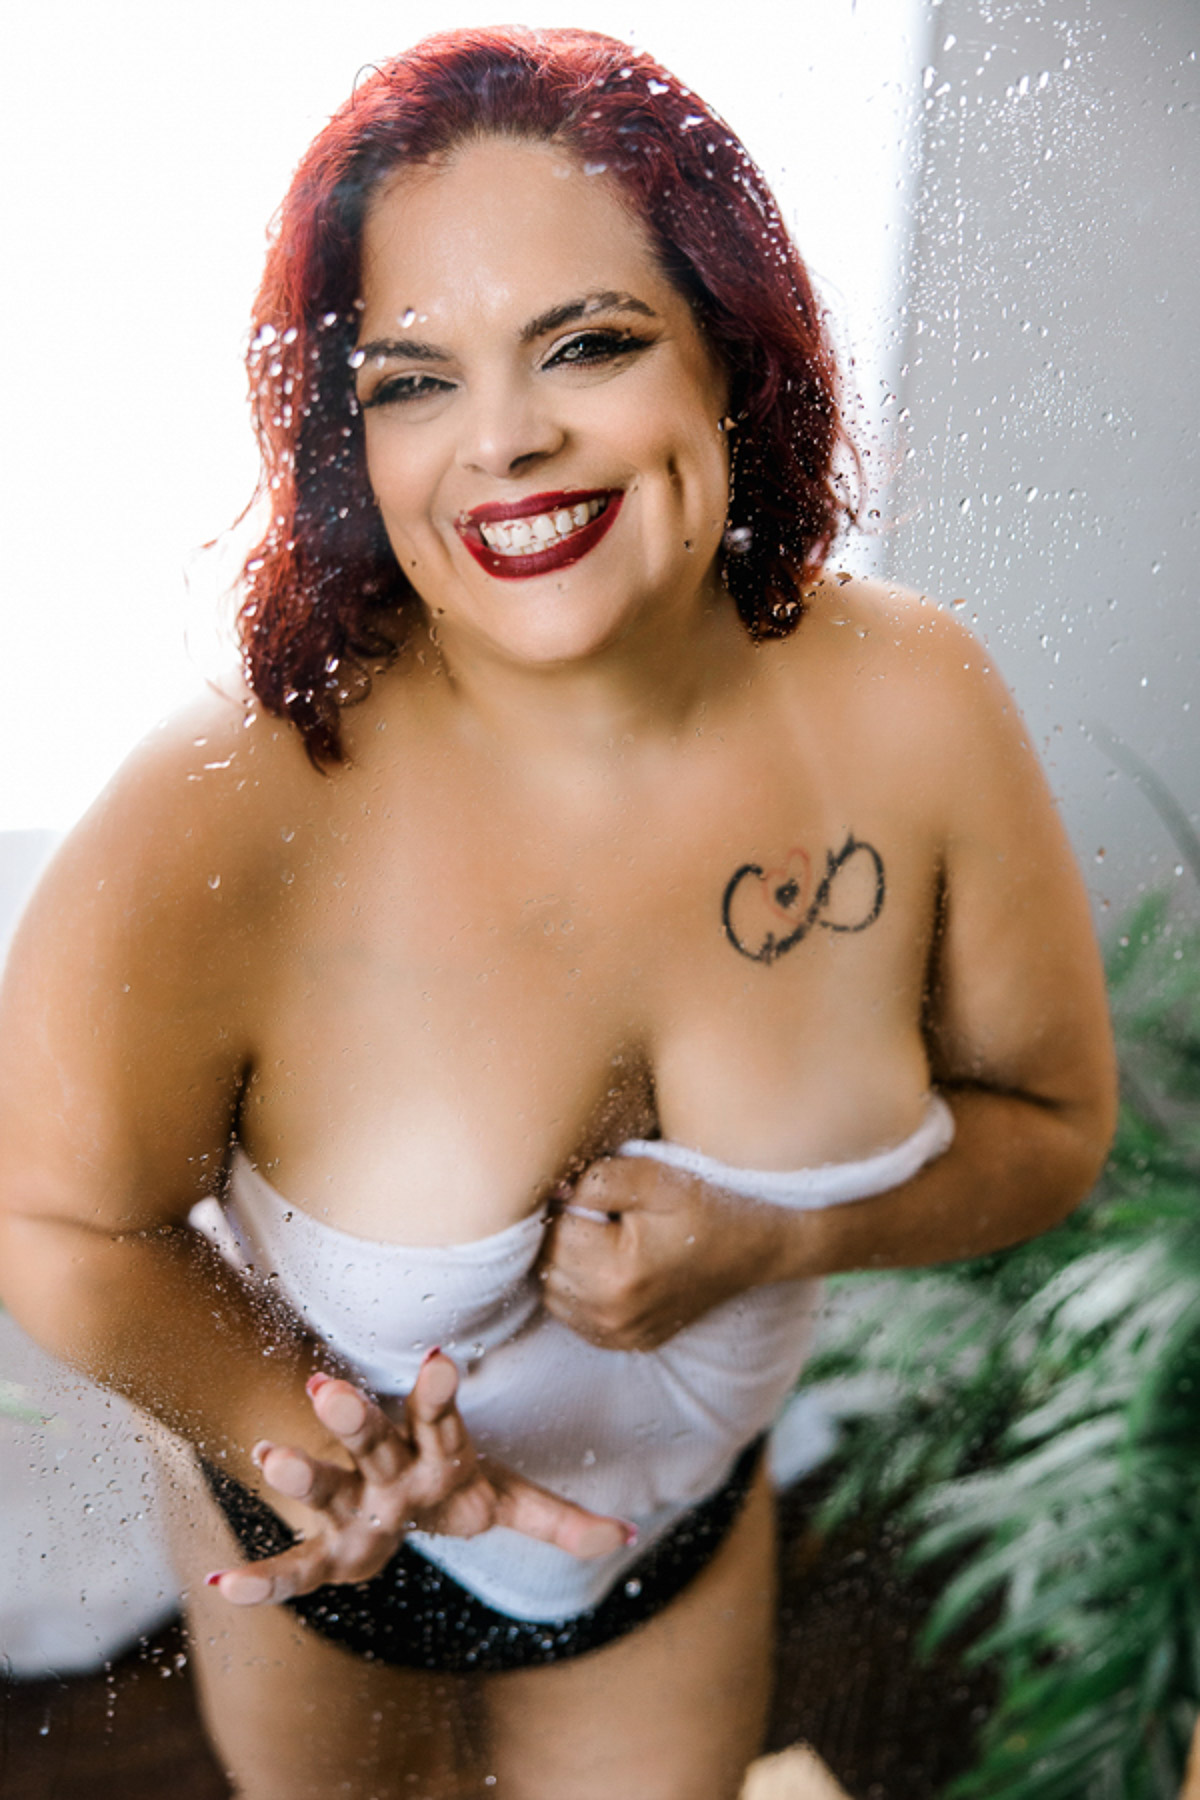 curvy woman in black patines and white top in shower smiling big